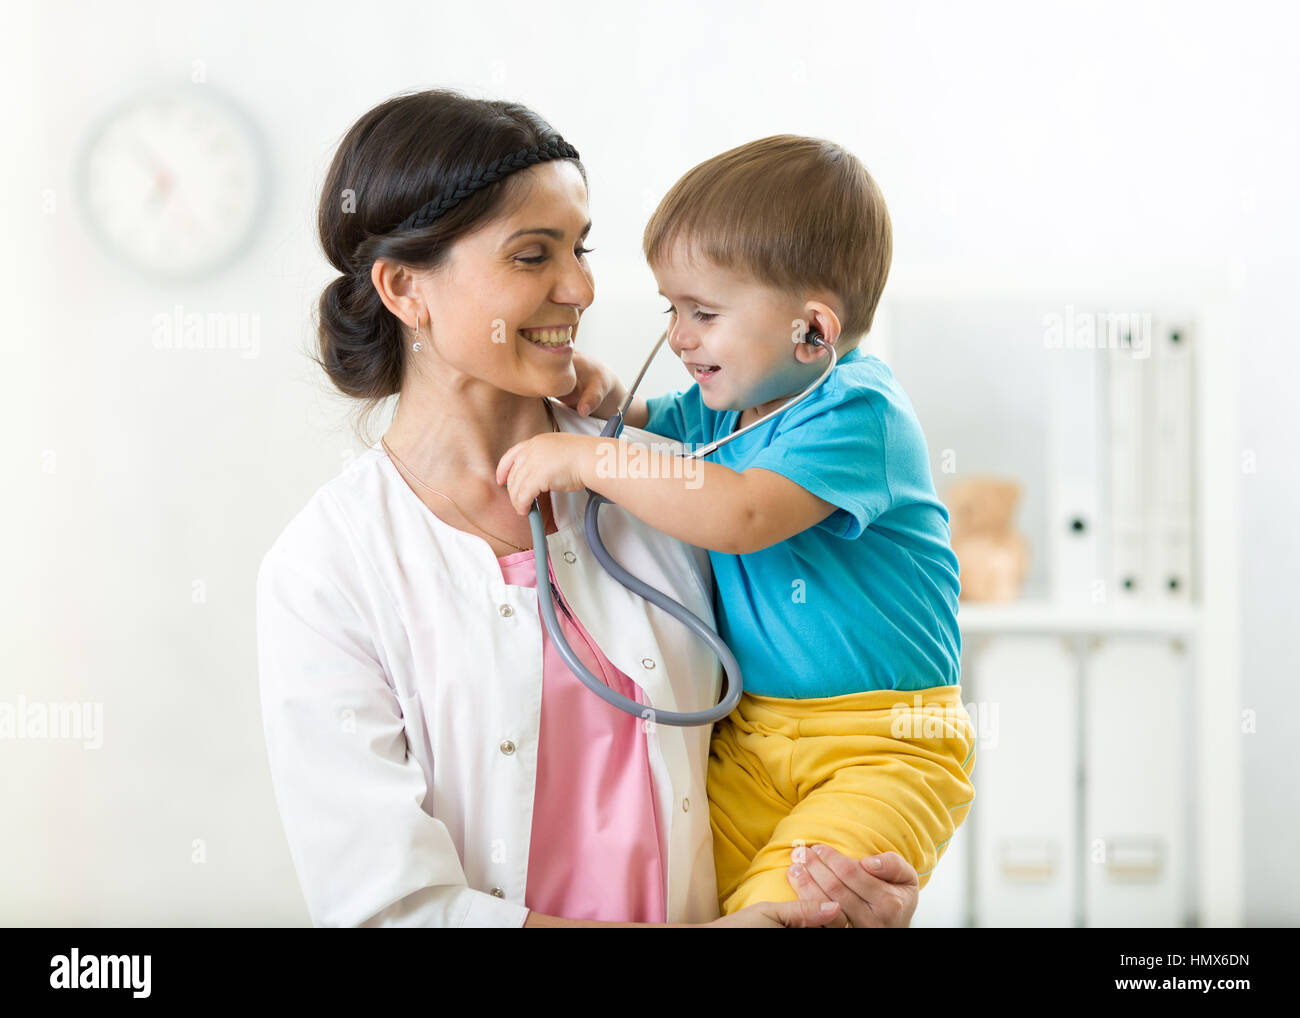 Little boy and young female doctor in hospital having examination Stock Photo